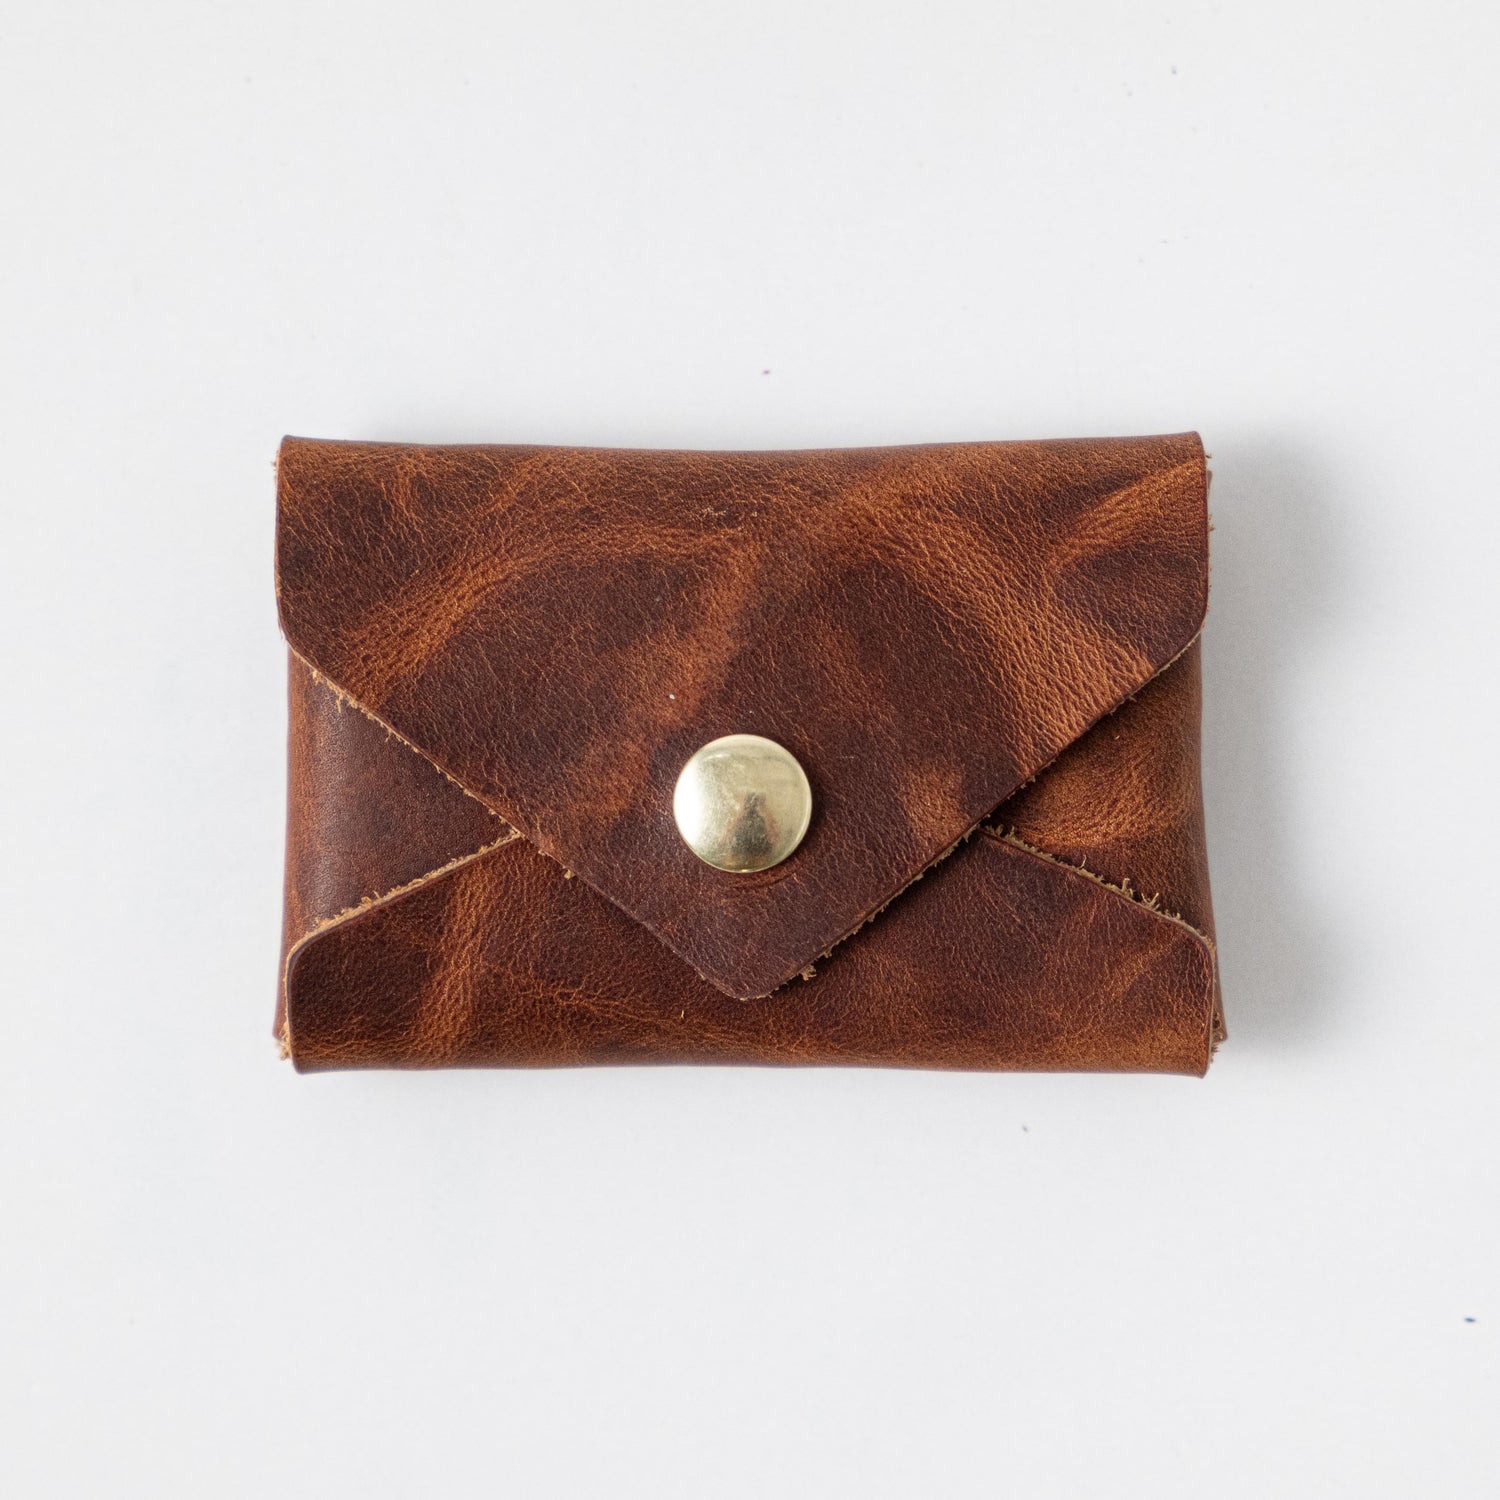 Handmade Leather Wallets Made in the USA